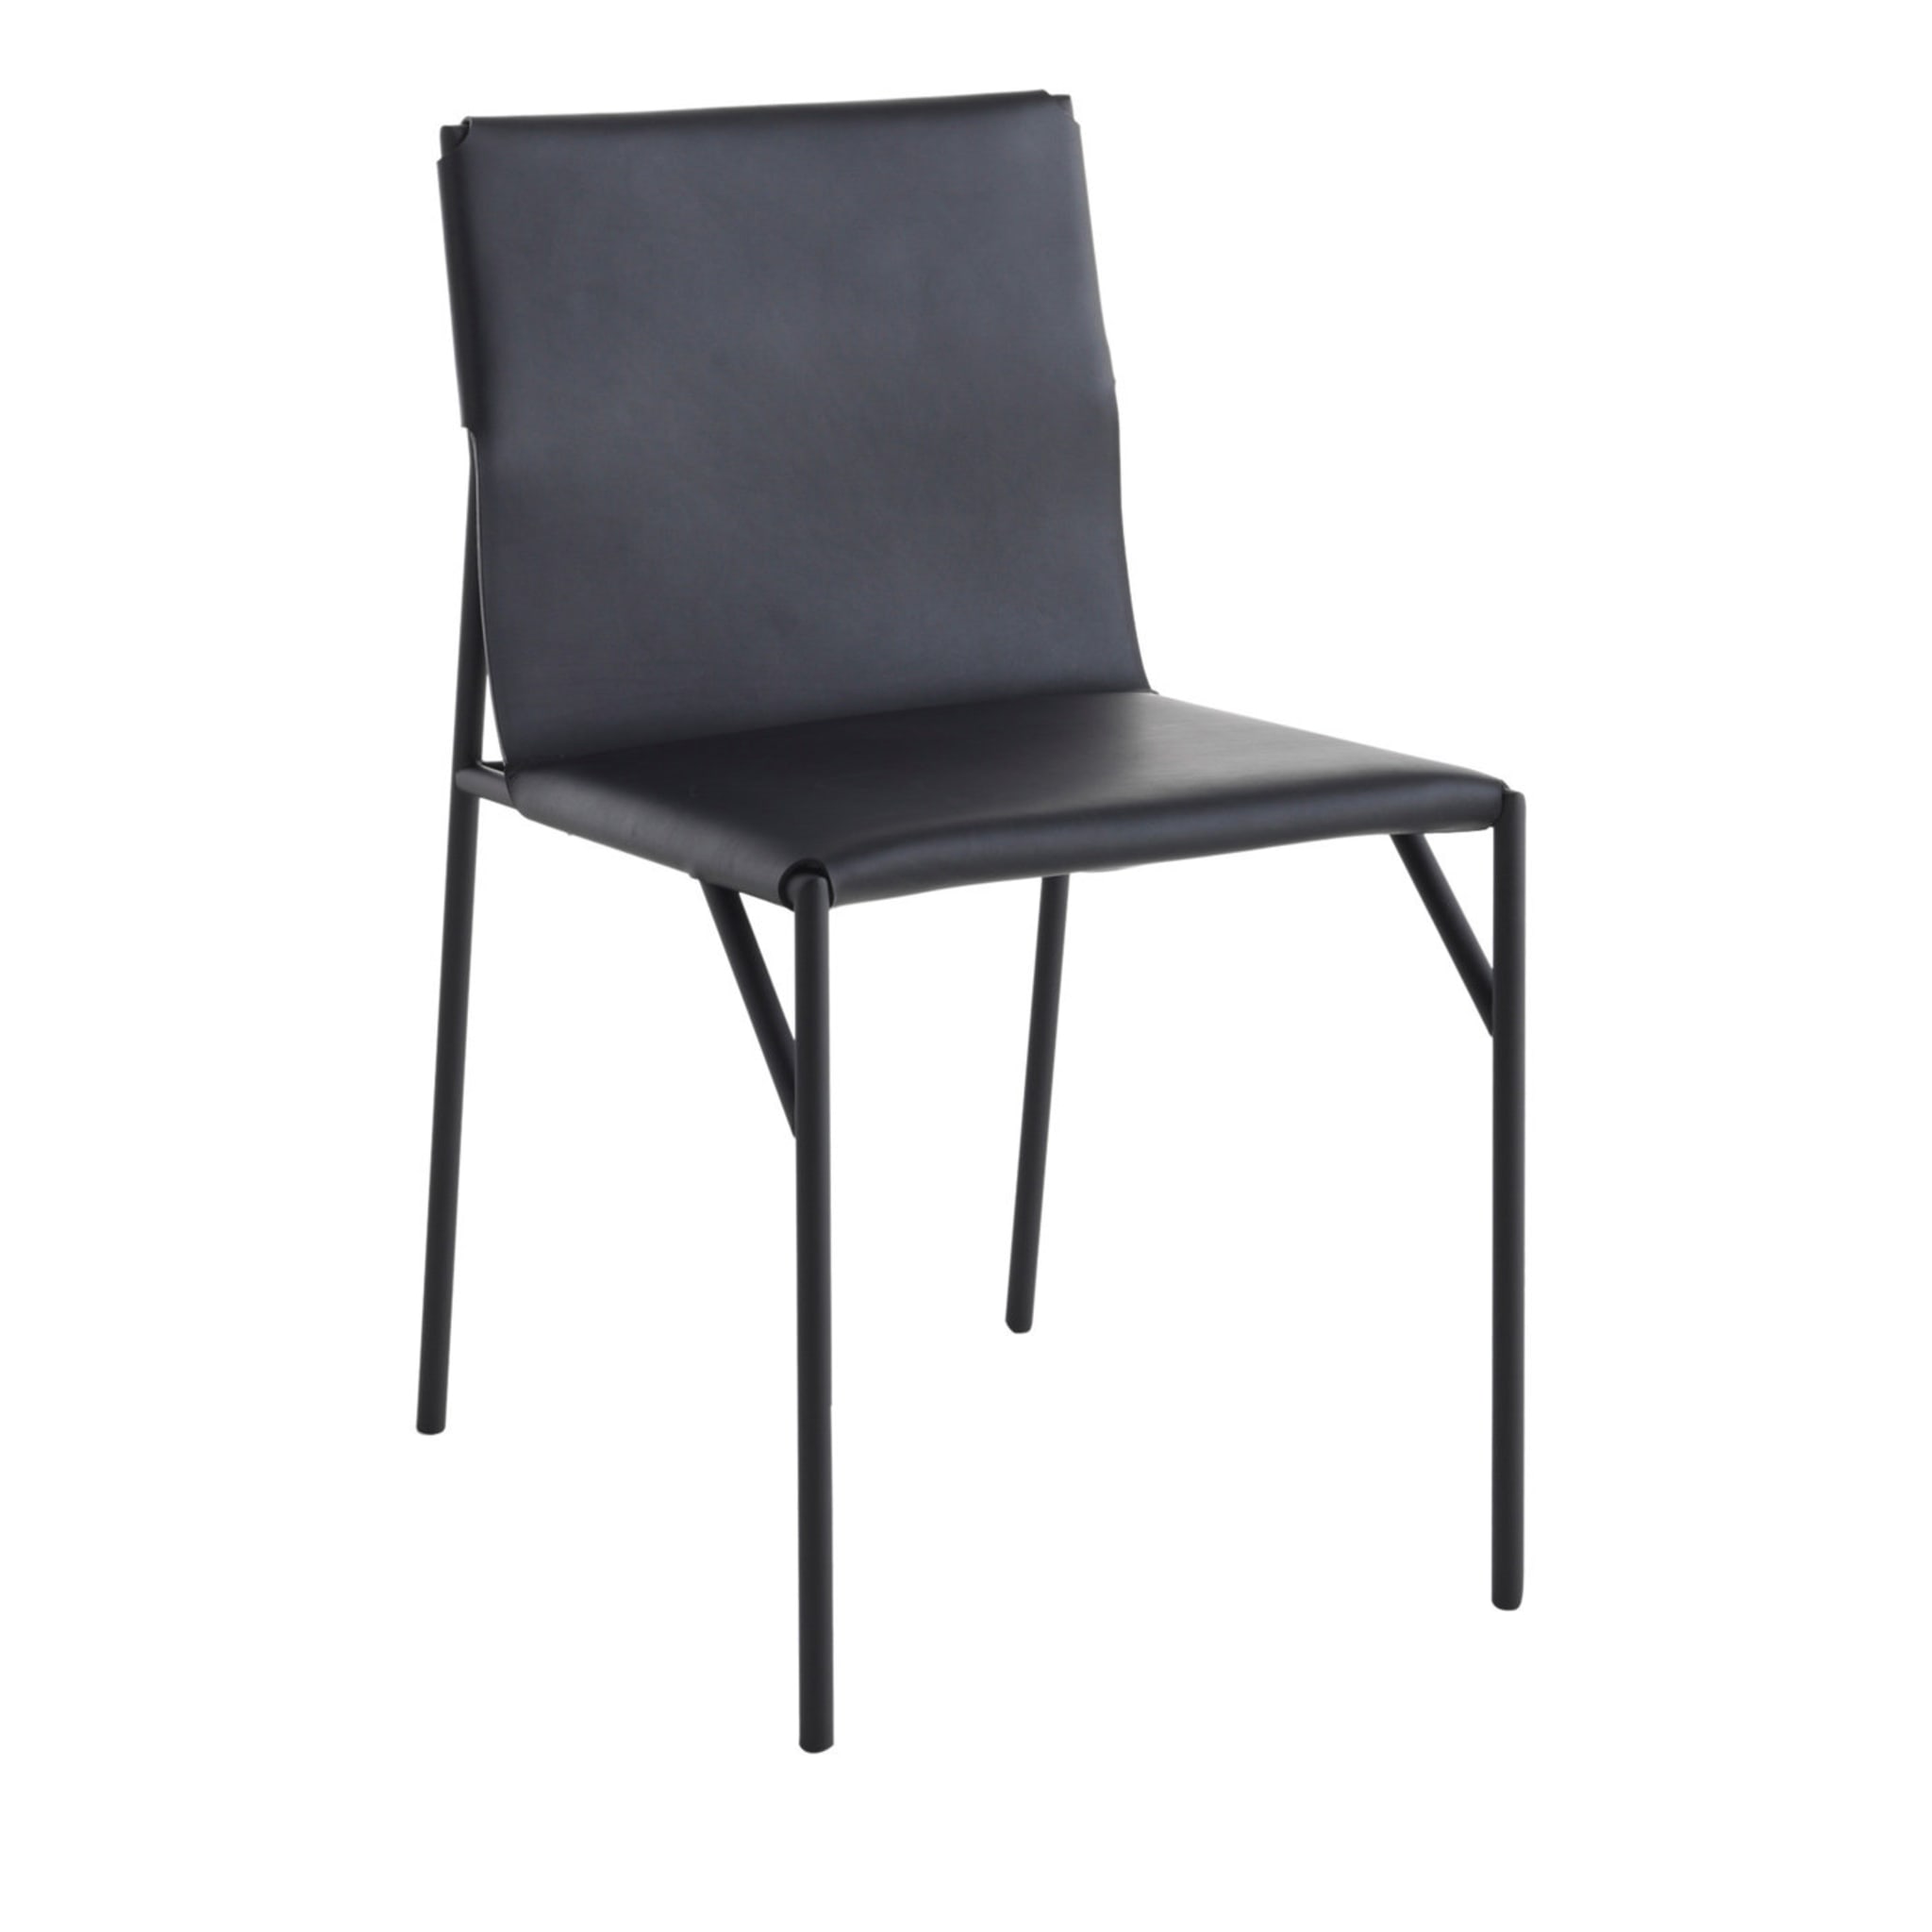 Tout Le Jour Black Leather Chair by Marc Thorpe - Main view